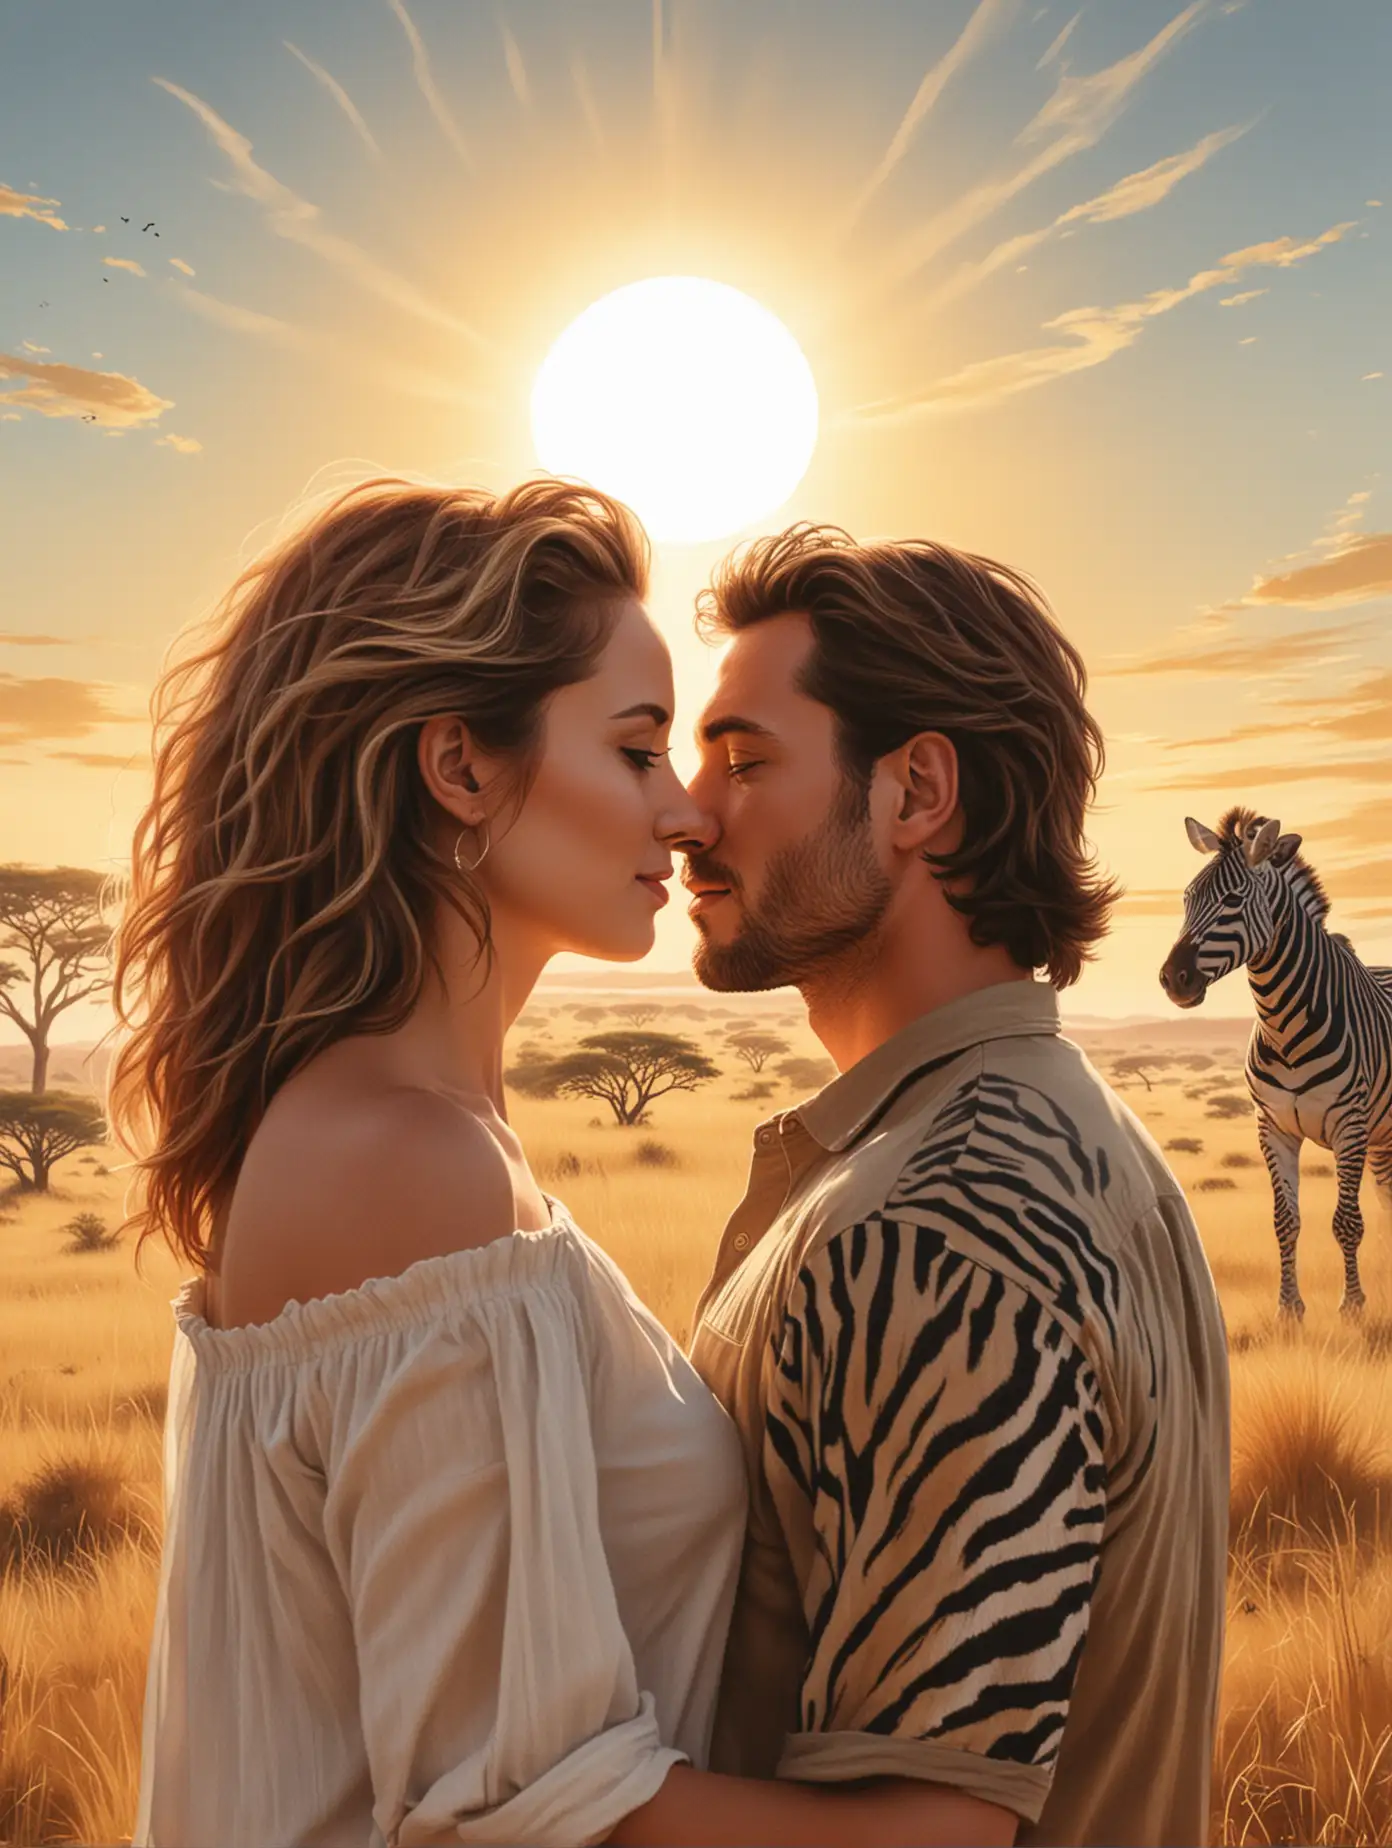 Create a realistic illustration of a couple looking at the African savanna, up close portrait, view from the back, the couple is on the left side of the illustration, there is a lion and a zebra in the distance, the sun high in the sky 